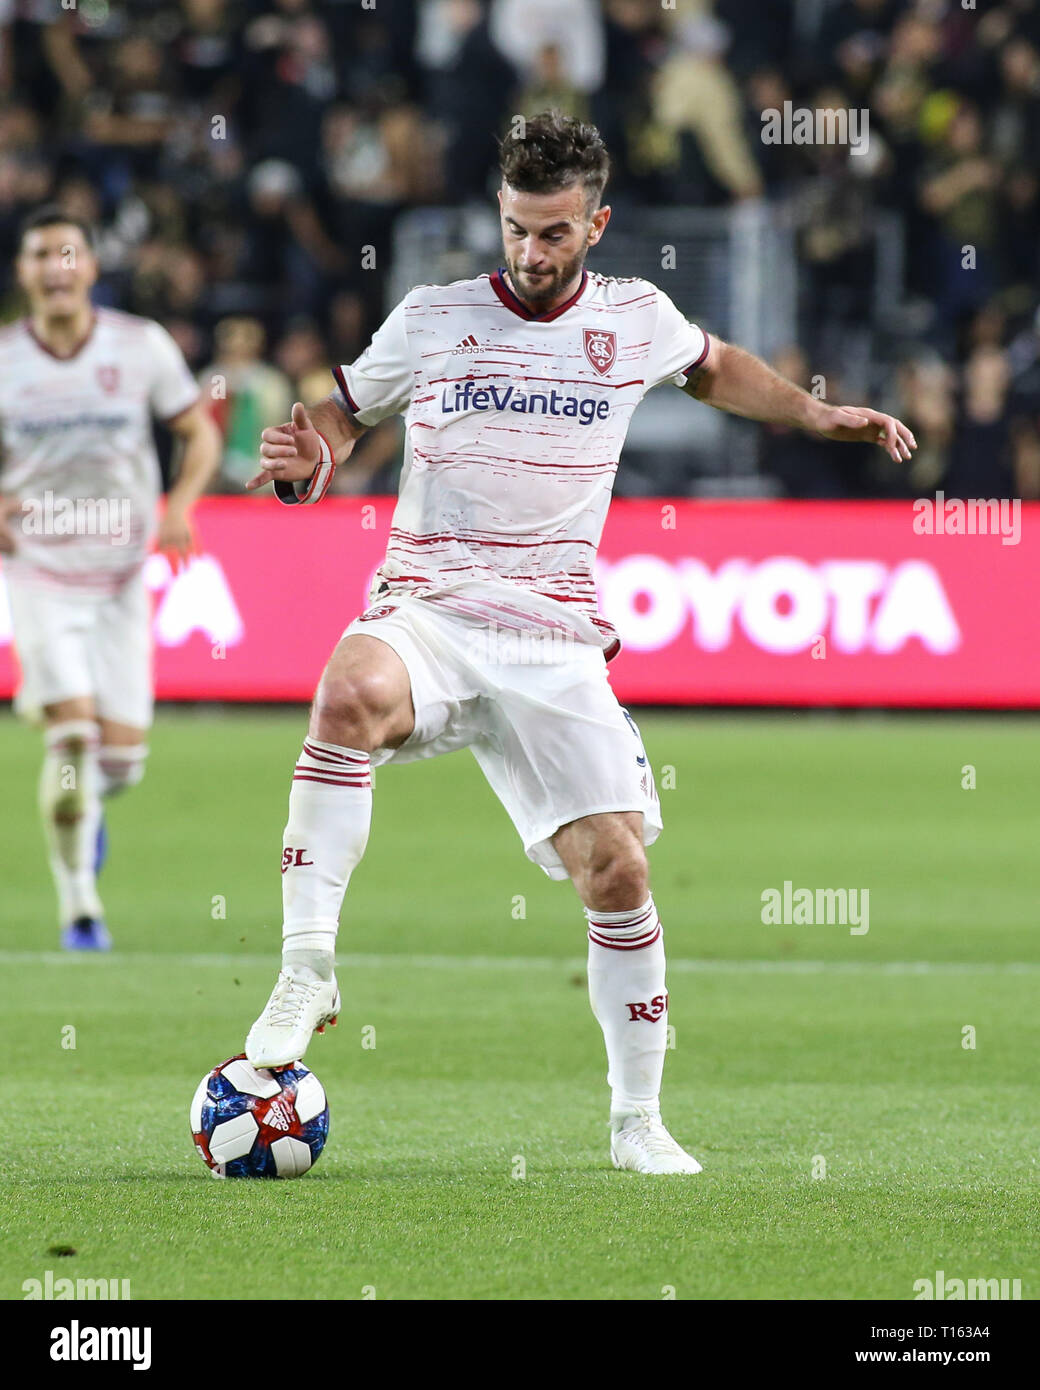 Los Angeles, CA, USA. 23rd Mar, 2019. Real Salt Lake midfielder Kyle Beckerman (5) during the Los Angeles Football Club vs Real Salt Lake at BANC OF CALIFORNIA Stadium in Los Angeles, Ca on March 23, 2019. Jevone Moore Credit: csm/Alamy Live News Stock Photo